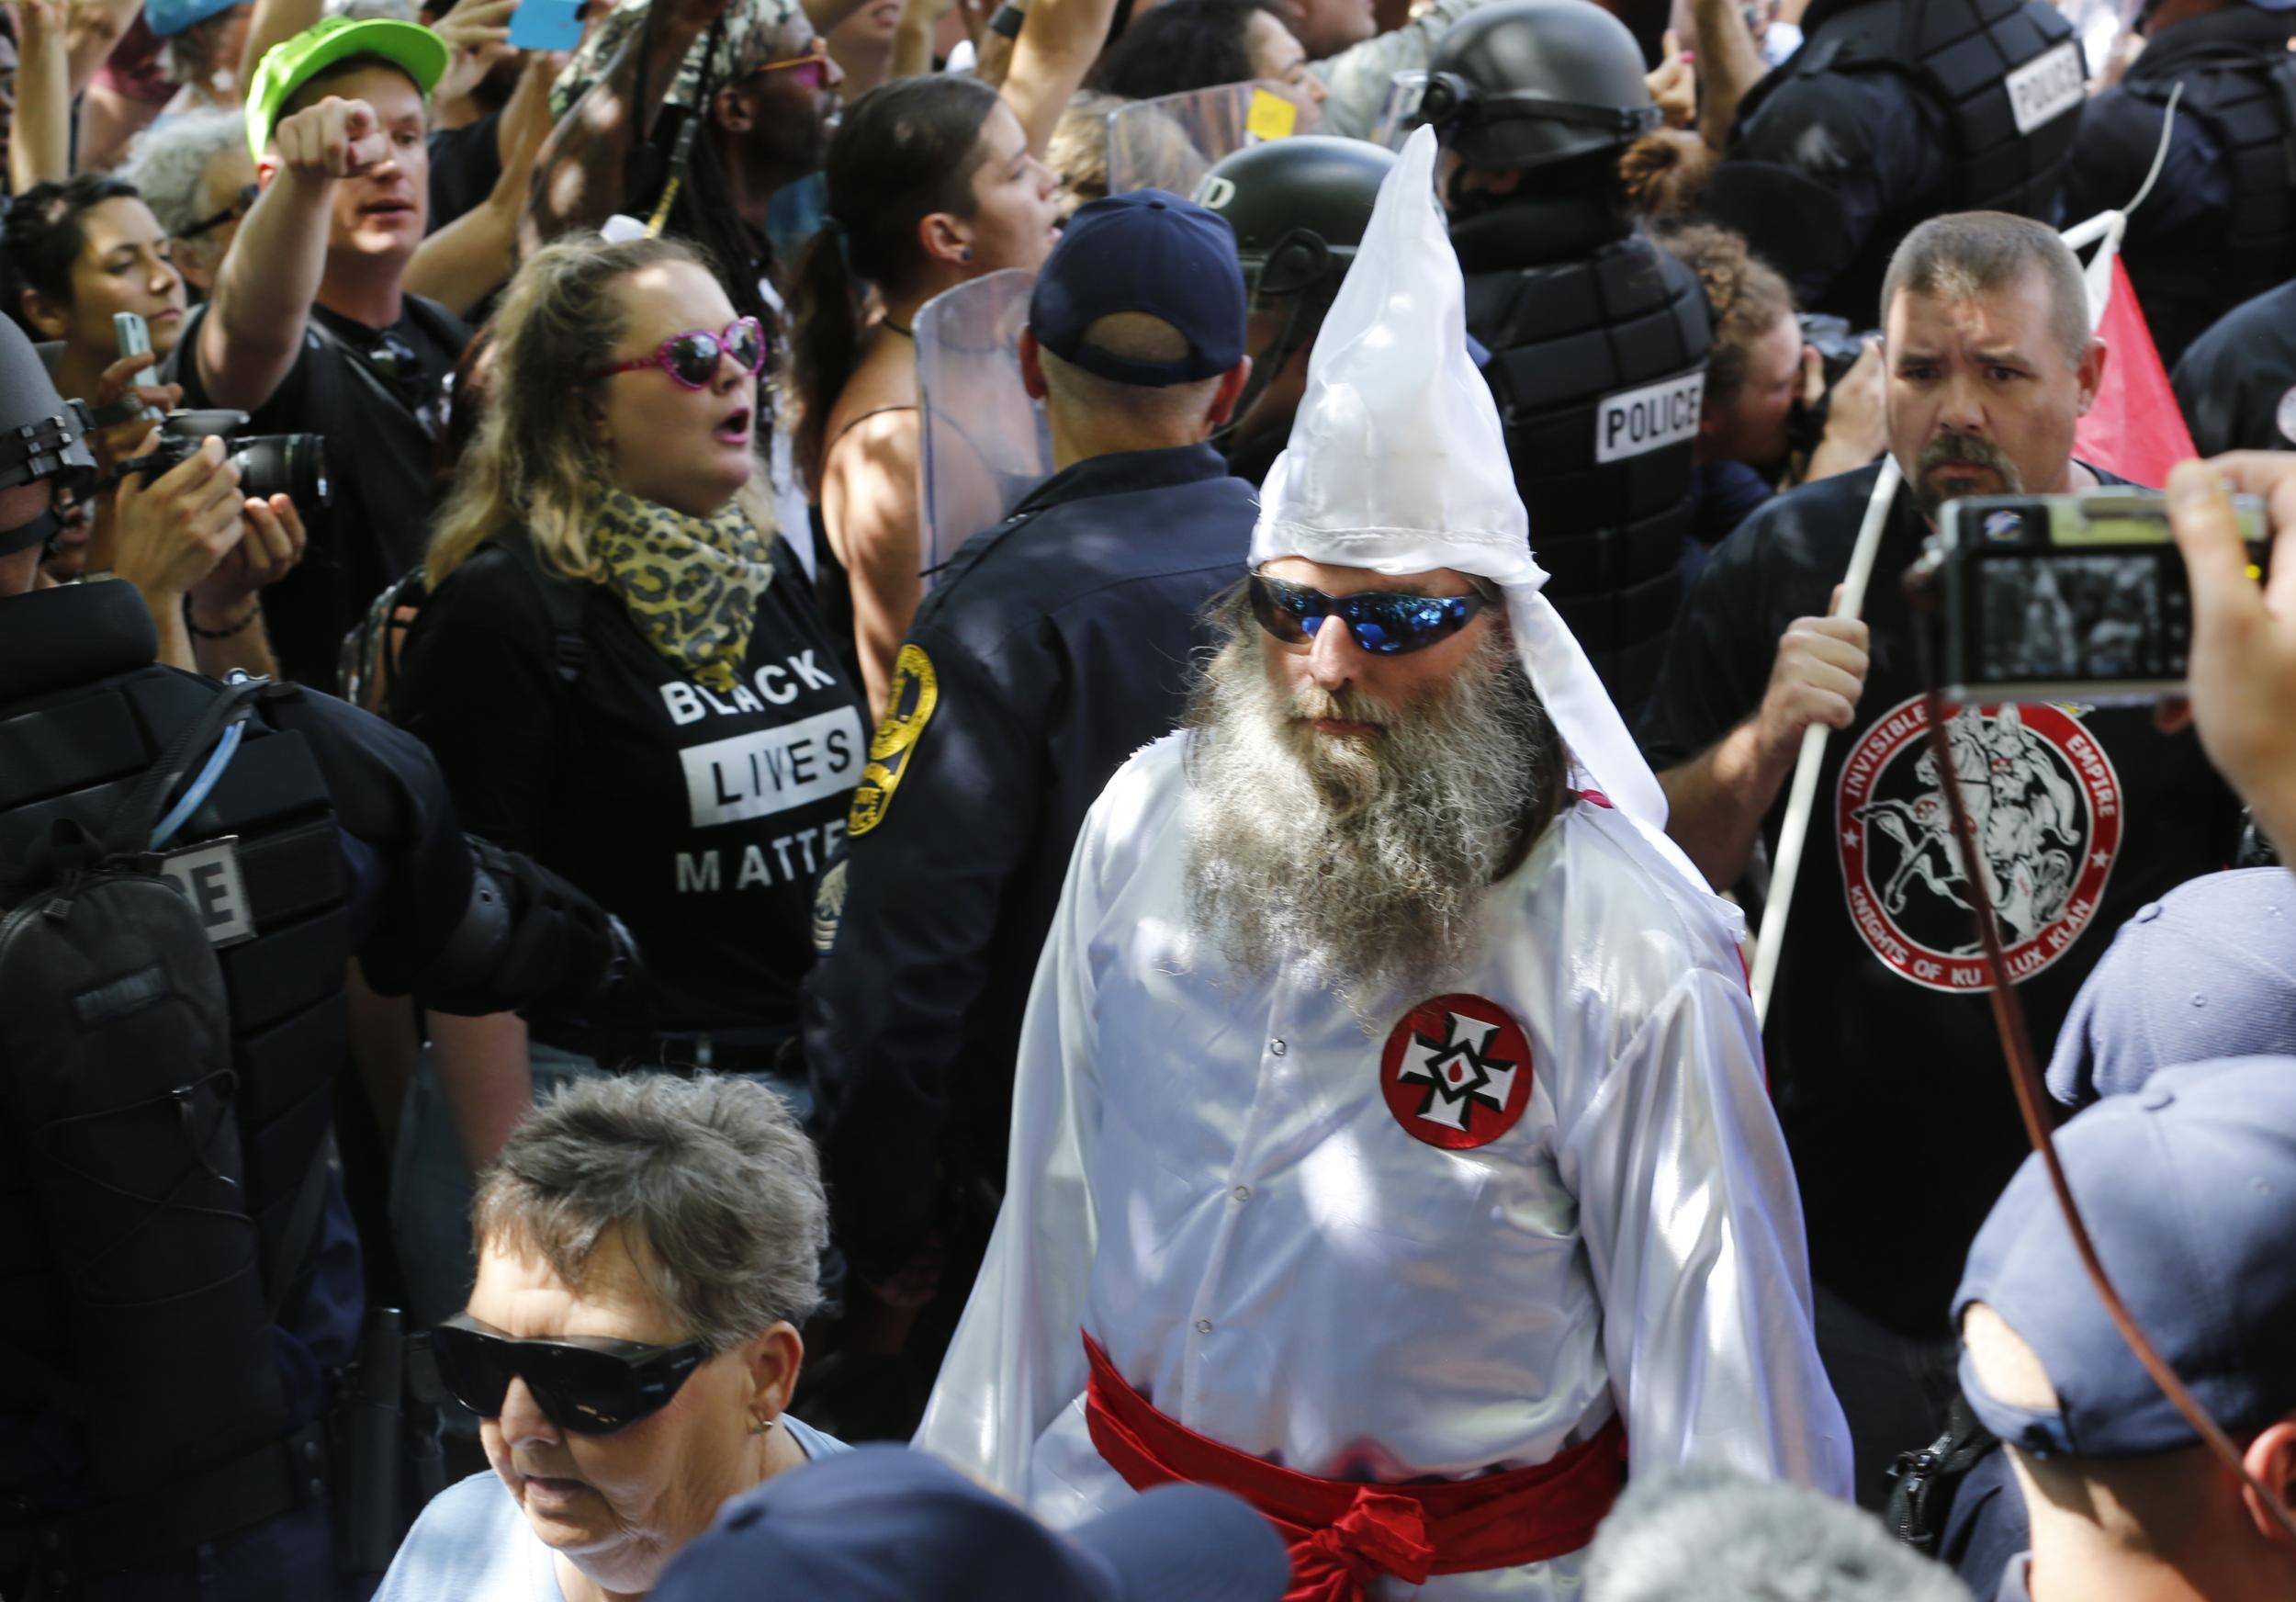 Members of the KKK are escorted by police past a large group of protesters during a rally in Charlottesville (AP)